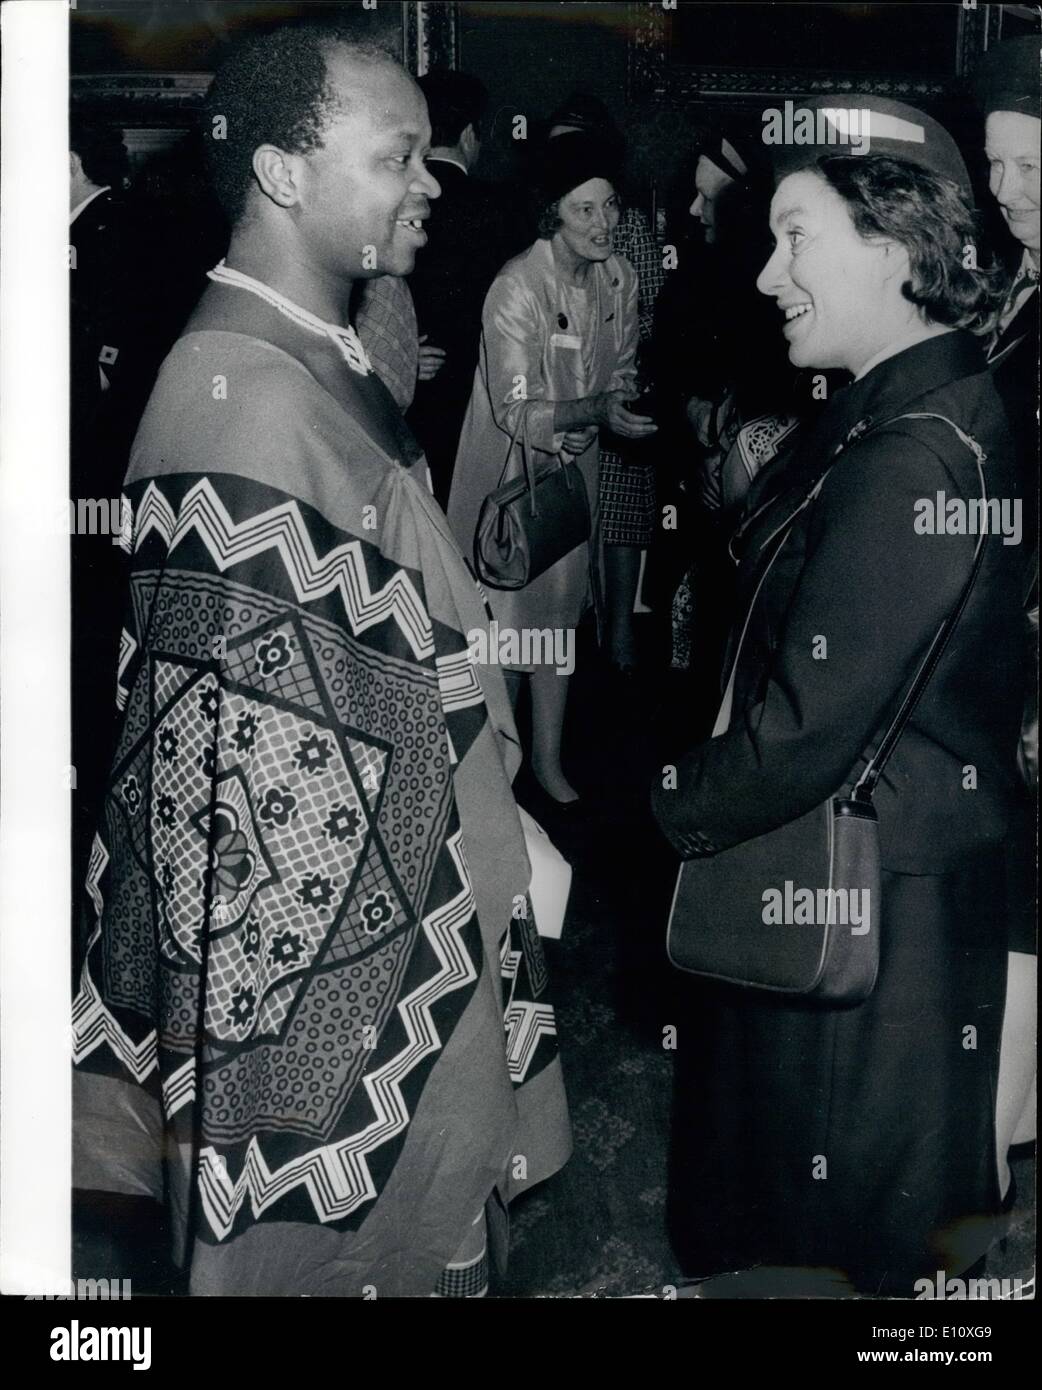 May 17, 1974 - Princess Margaret at Annual General Meeting of Girl Guides Association. Princess Margaret, in her capacity of President of the Girls Guides Association, chats to colourfully clad Mr. R.M. Shabalala, First Secretary, Office of the High Commissioner for the Kingdom of Swaziland, after she presided at this afternoon's annual general meeting of the Association, at St. James Palace. Mr. Shabalala was on hand to escourt Swaziland Prime Minister's wife, Lady Diamini, President of the Swaziland Girl Guides Association, who also attended the meeting. Stock Photo